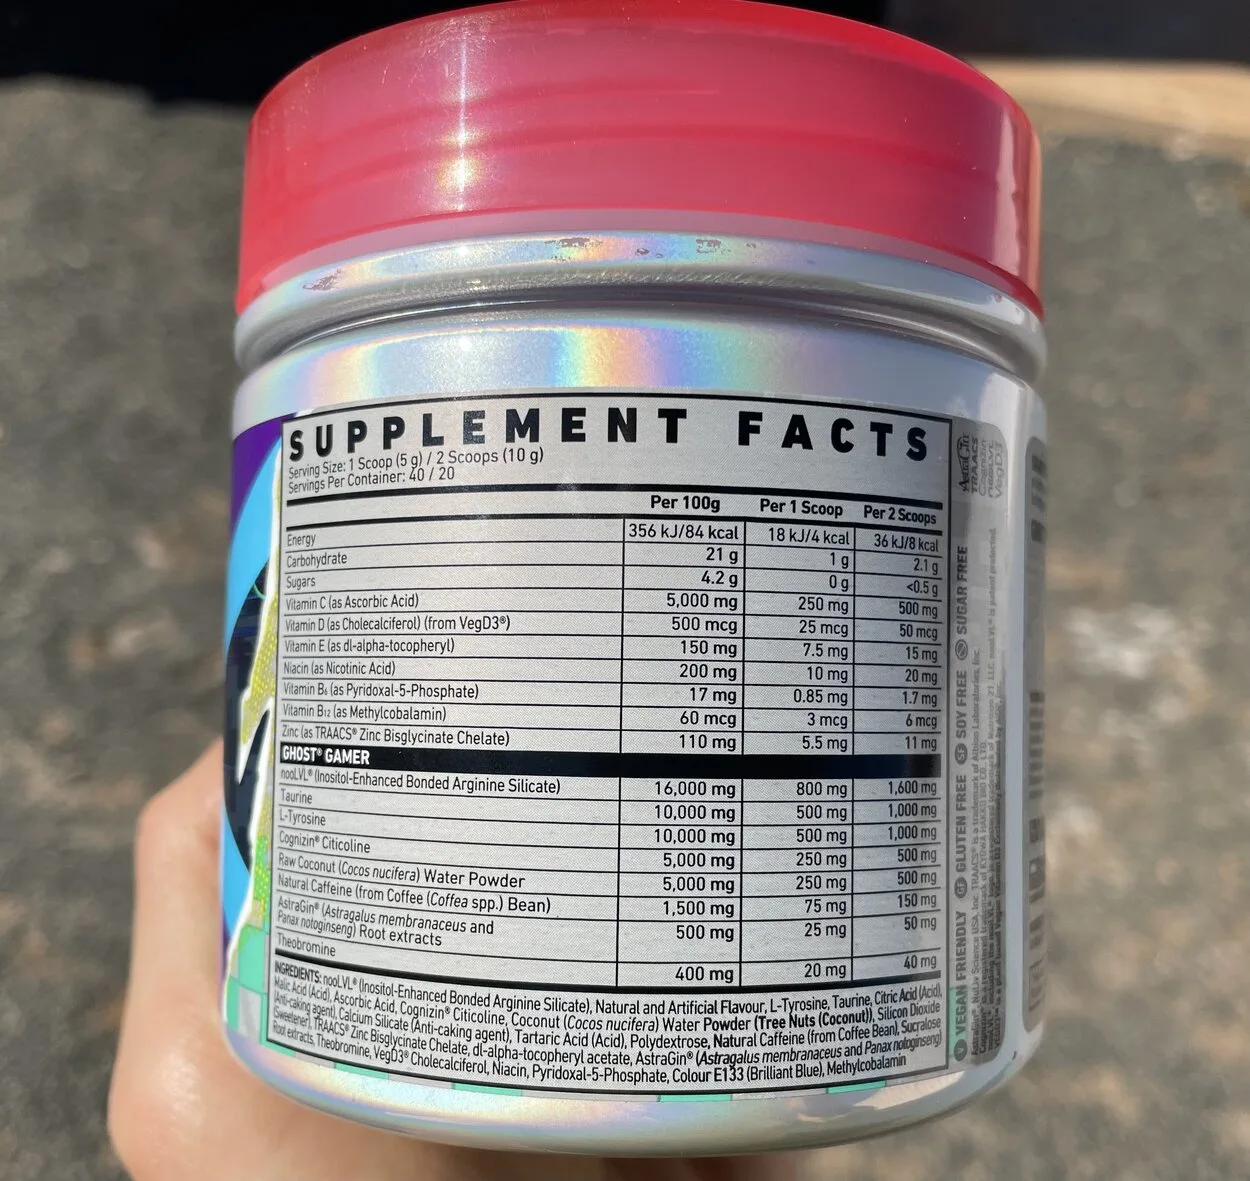 The supplement fact label of Ghost Gamer energy drink printed in the side of its tub.